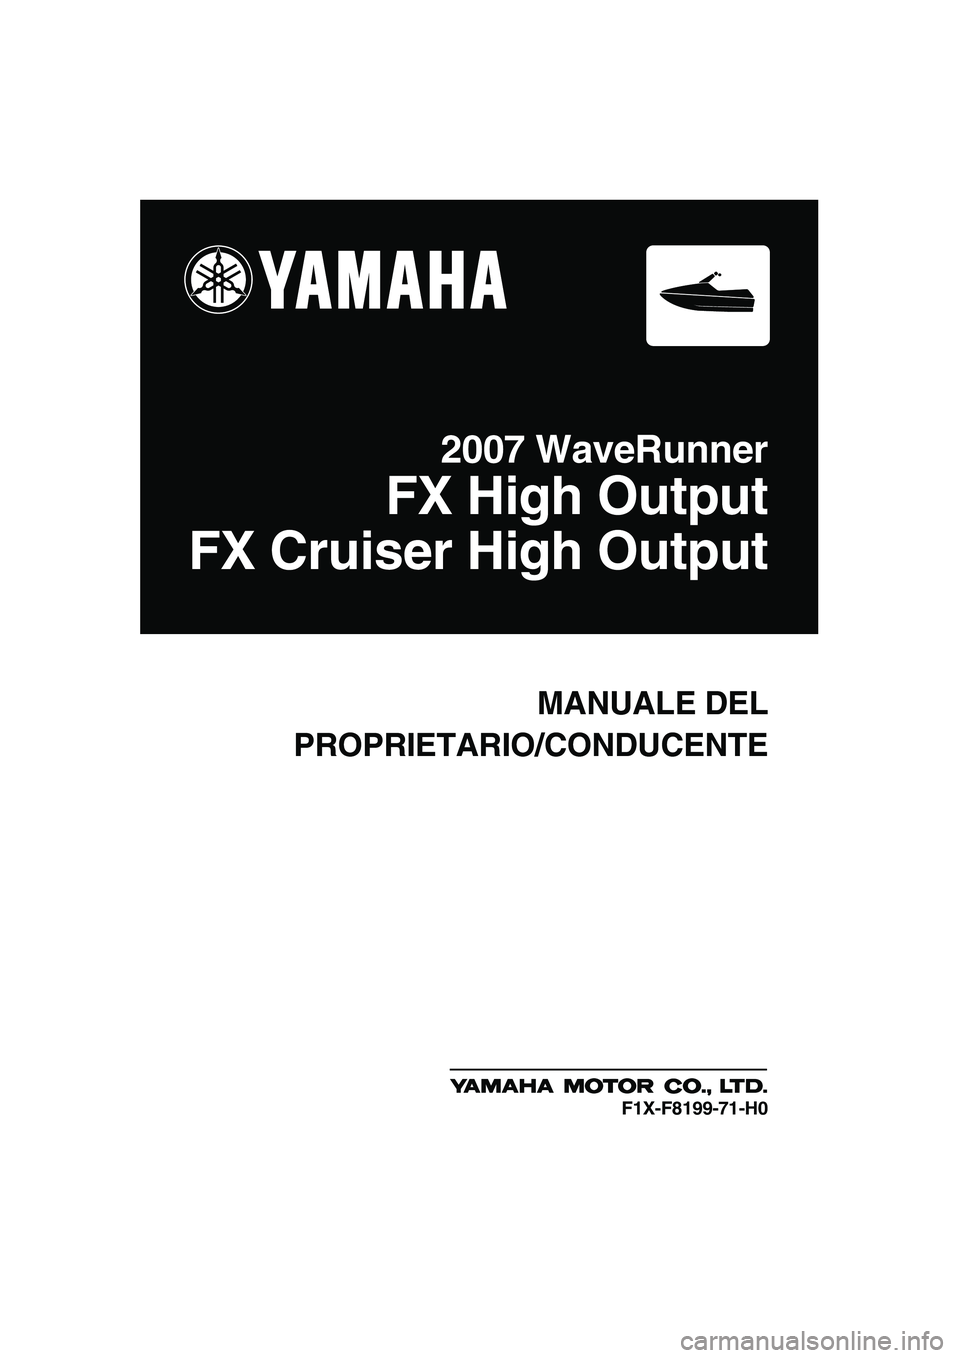 YAMAHA FX HO CRUISER 2007  Manuale duso (in Italian) MANUALE DEL
PROPRIETARIO/CONDUCENTE
2007 WaveRunner
FX High Output
FX Cruiser High Output
F1X-F8199-71-H0
UF1X71H0.book  Page 1  Wednesday, September 27, 2006  1:12 PM 